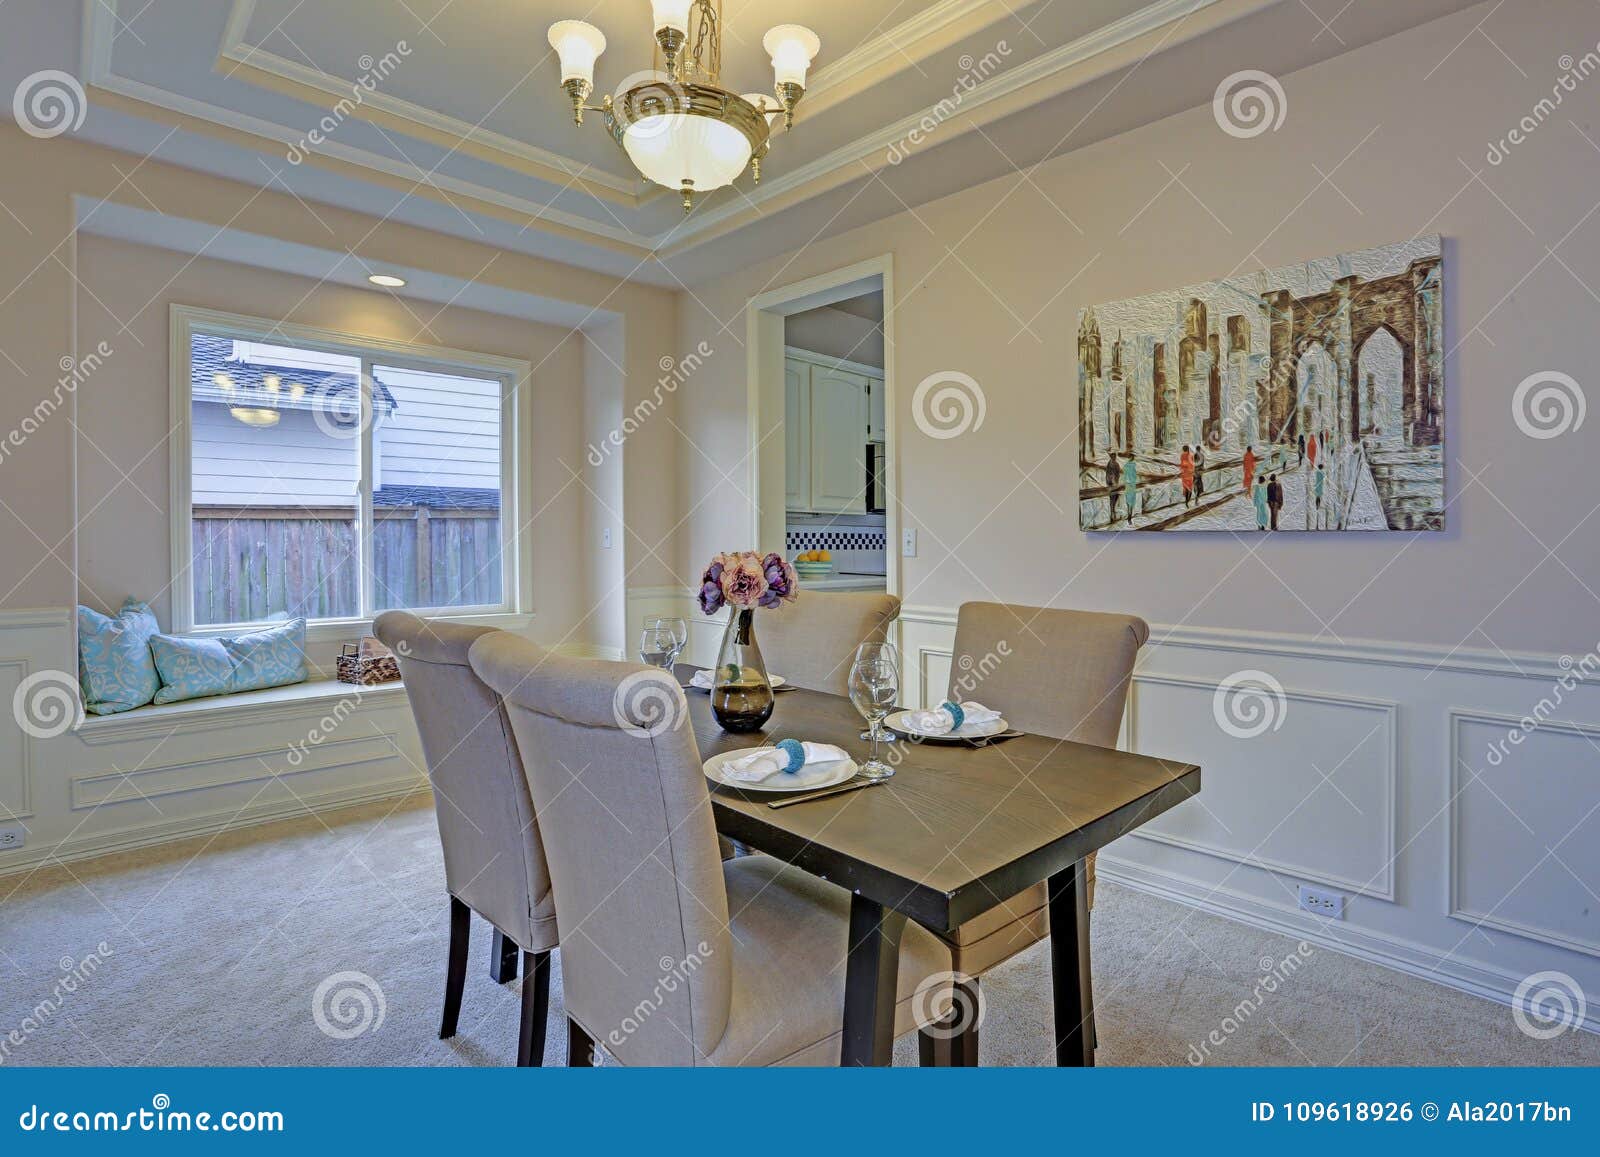 Chic Dining Room Accented With Wall Panel Mouldings And Tray